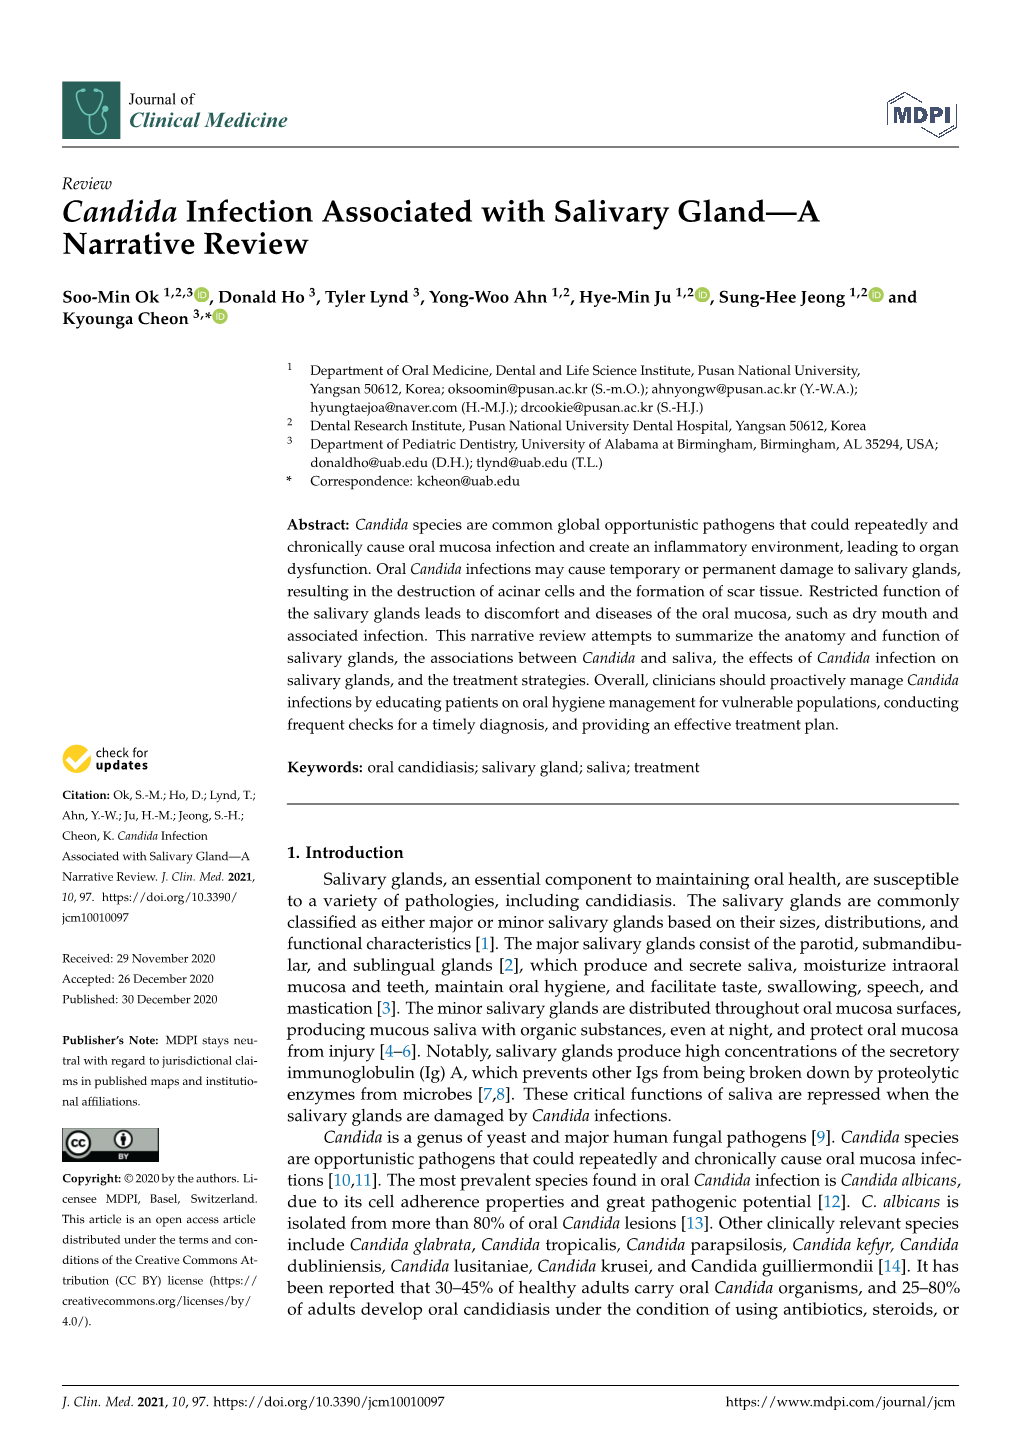 Candida Infection Associated with Salivary Gland—A Narrative Review